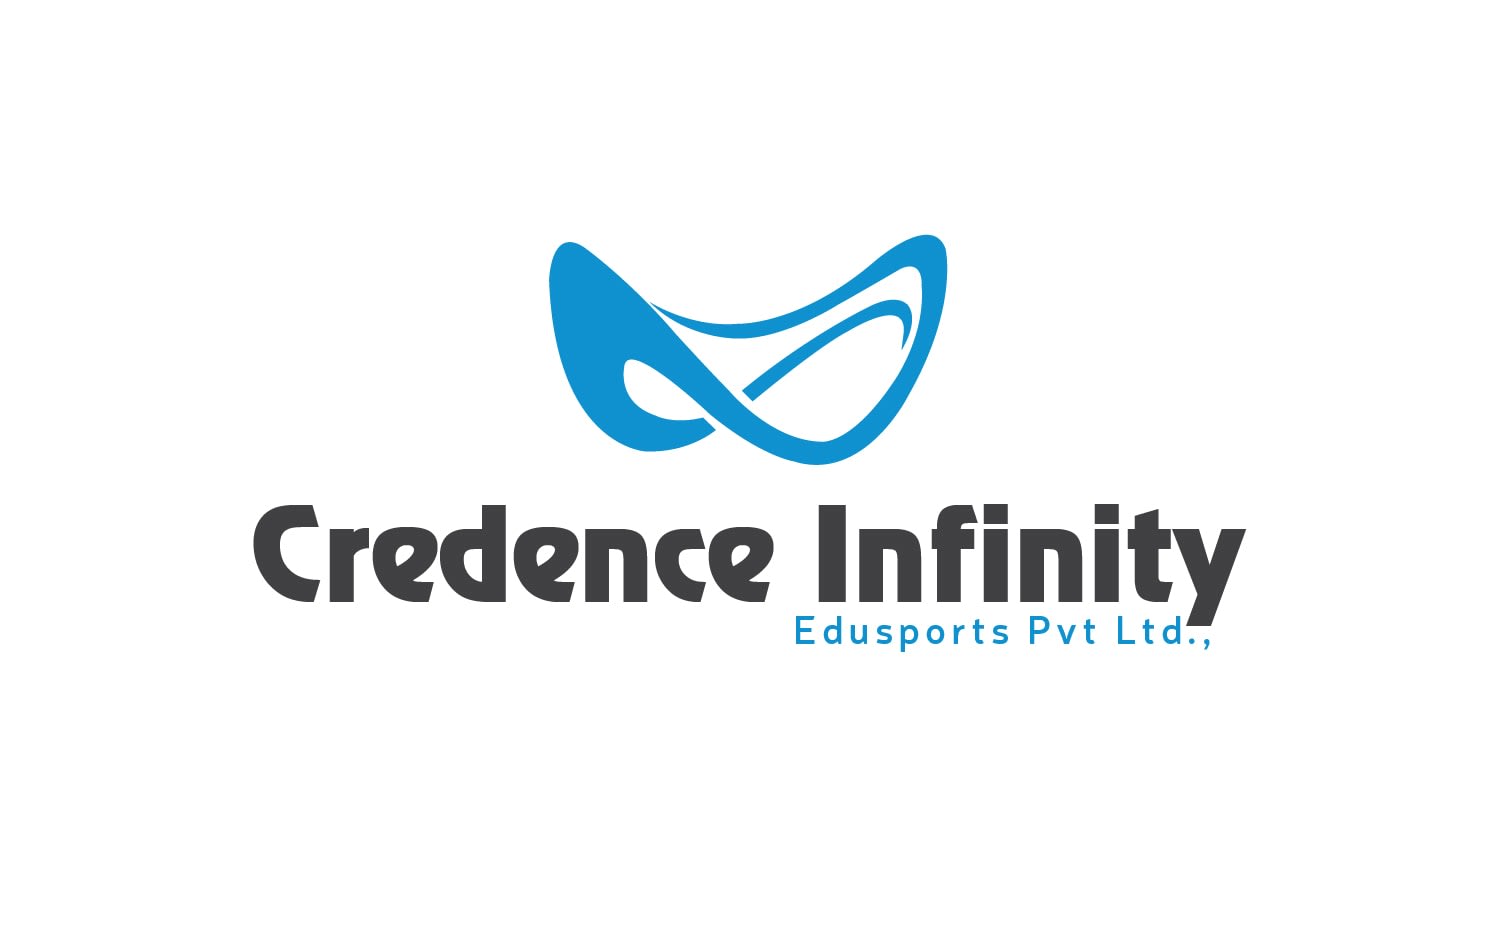 Credence Infinity